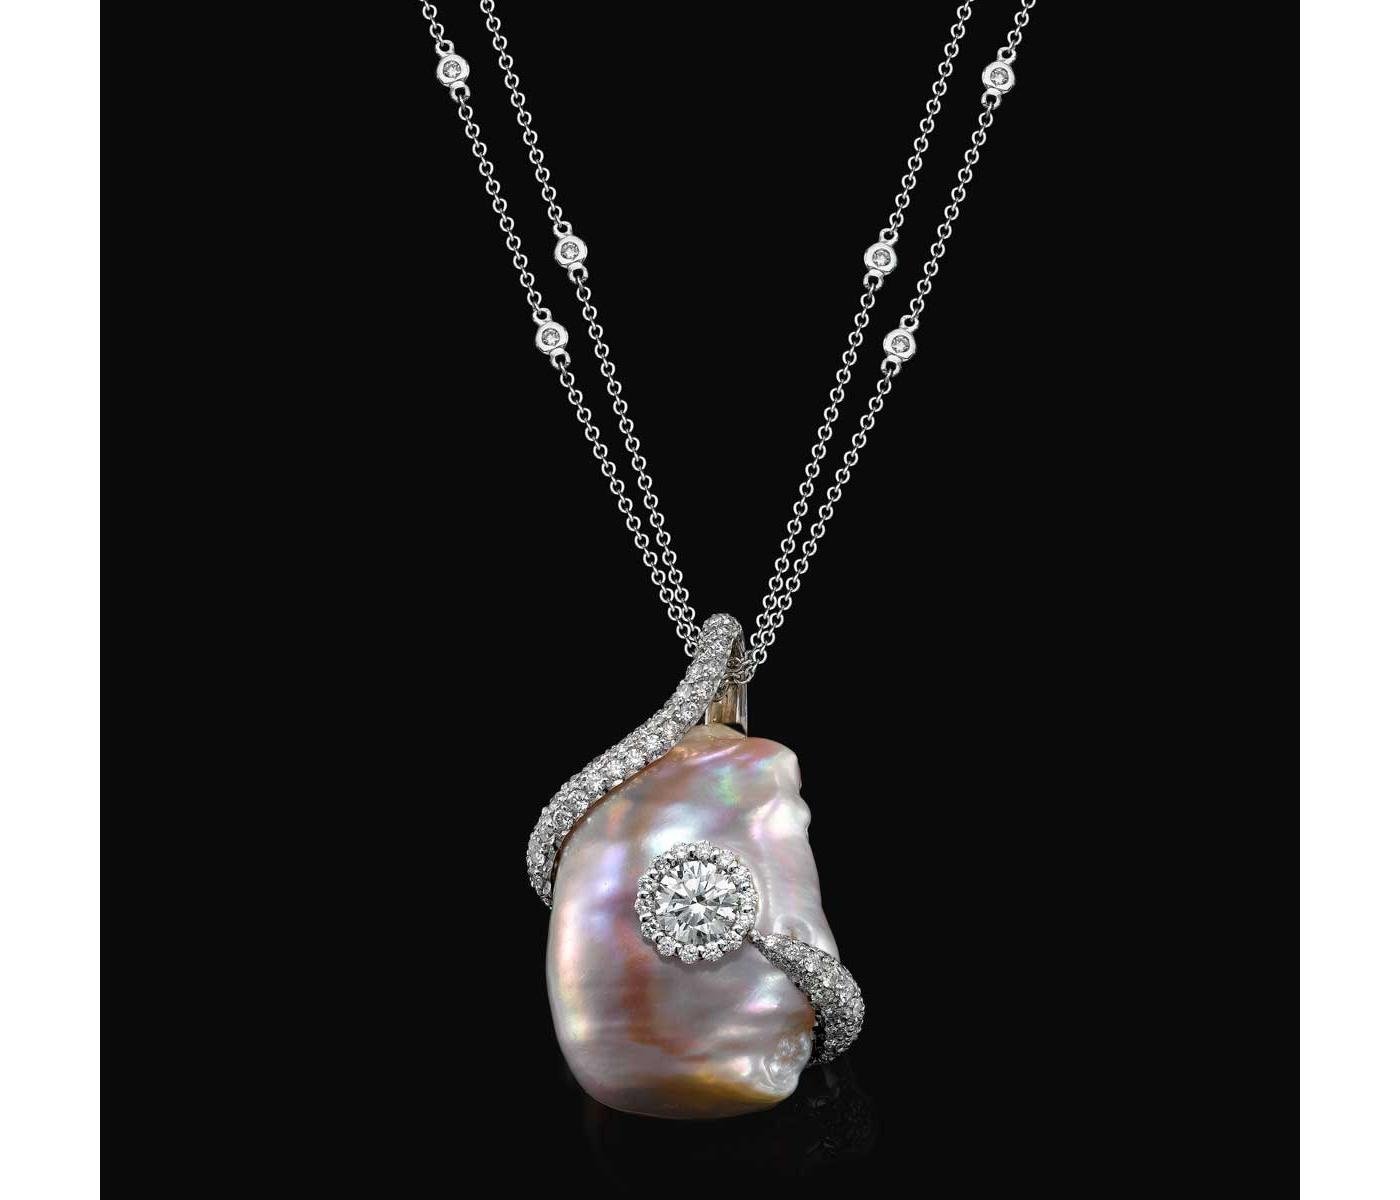 Pendant by London Pearl